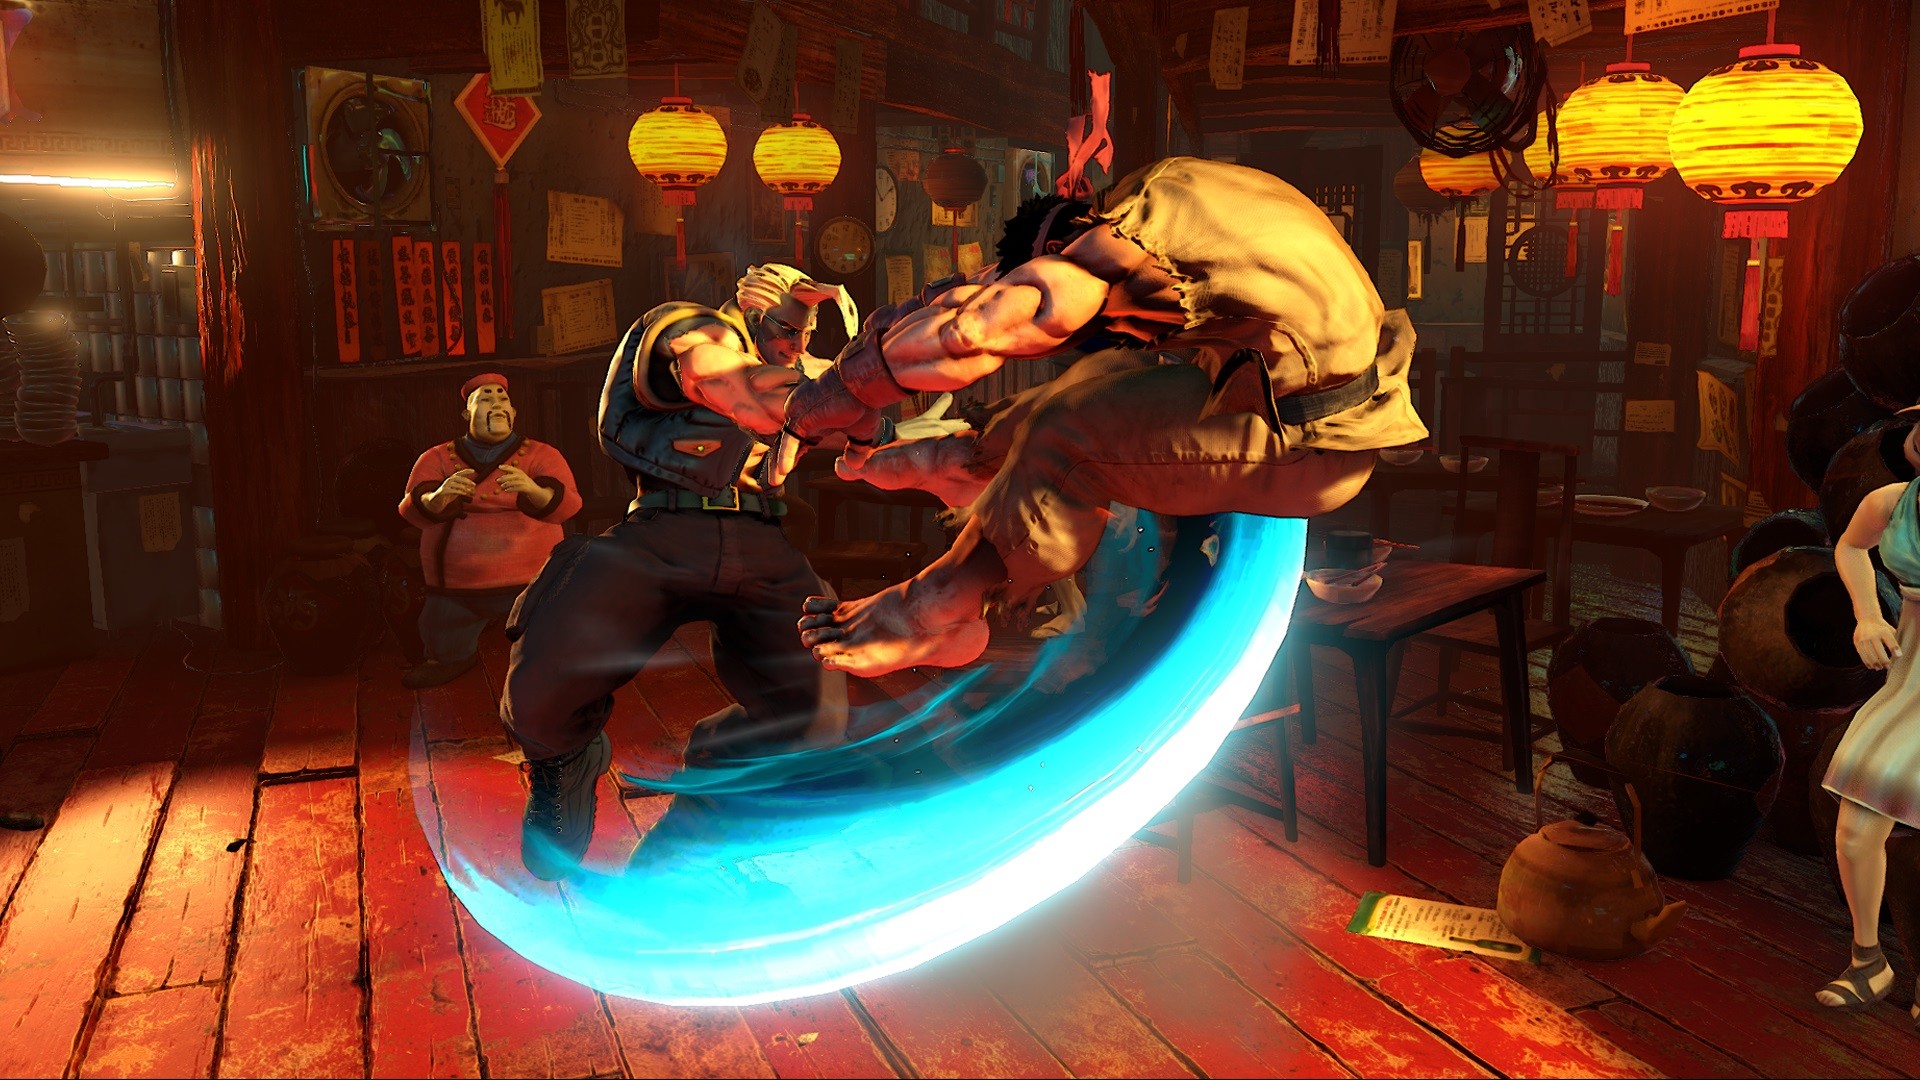 1920x1080 Street Fighter 5 Beta Announced, and a Look at the New .